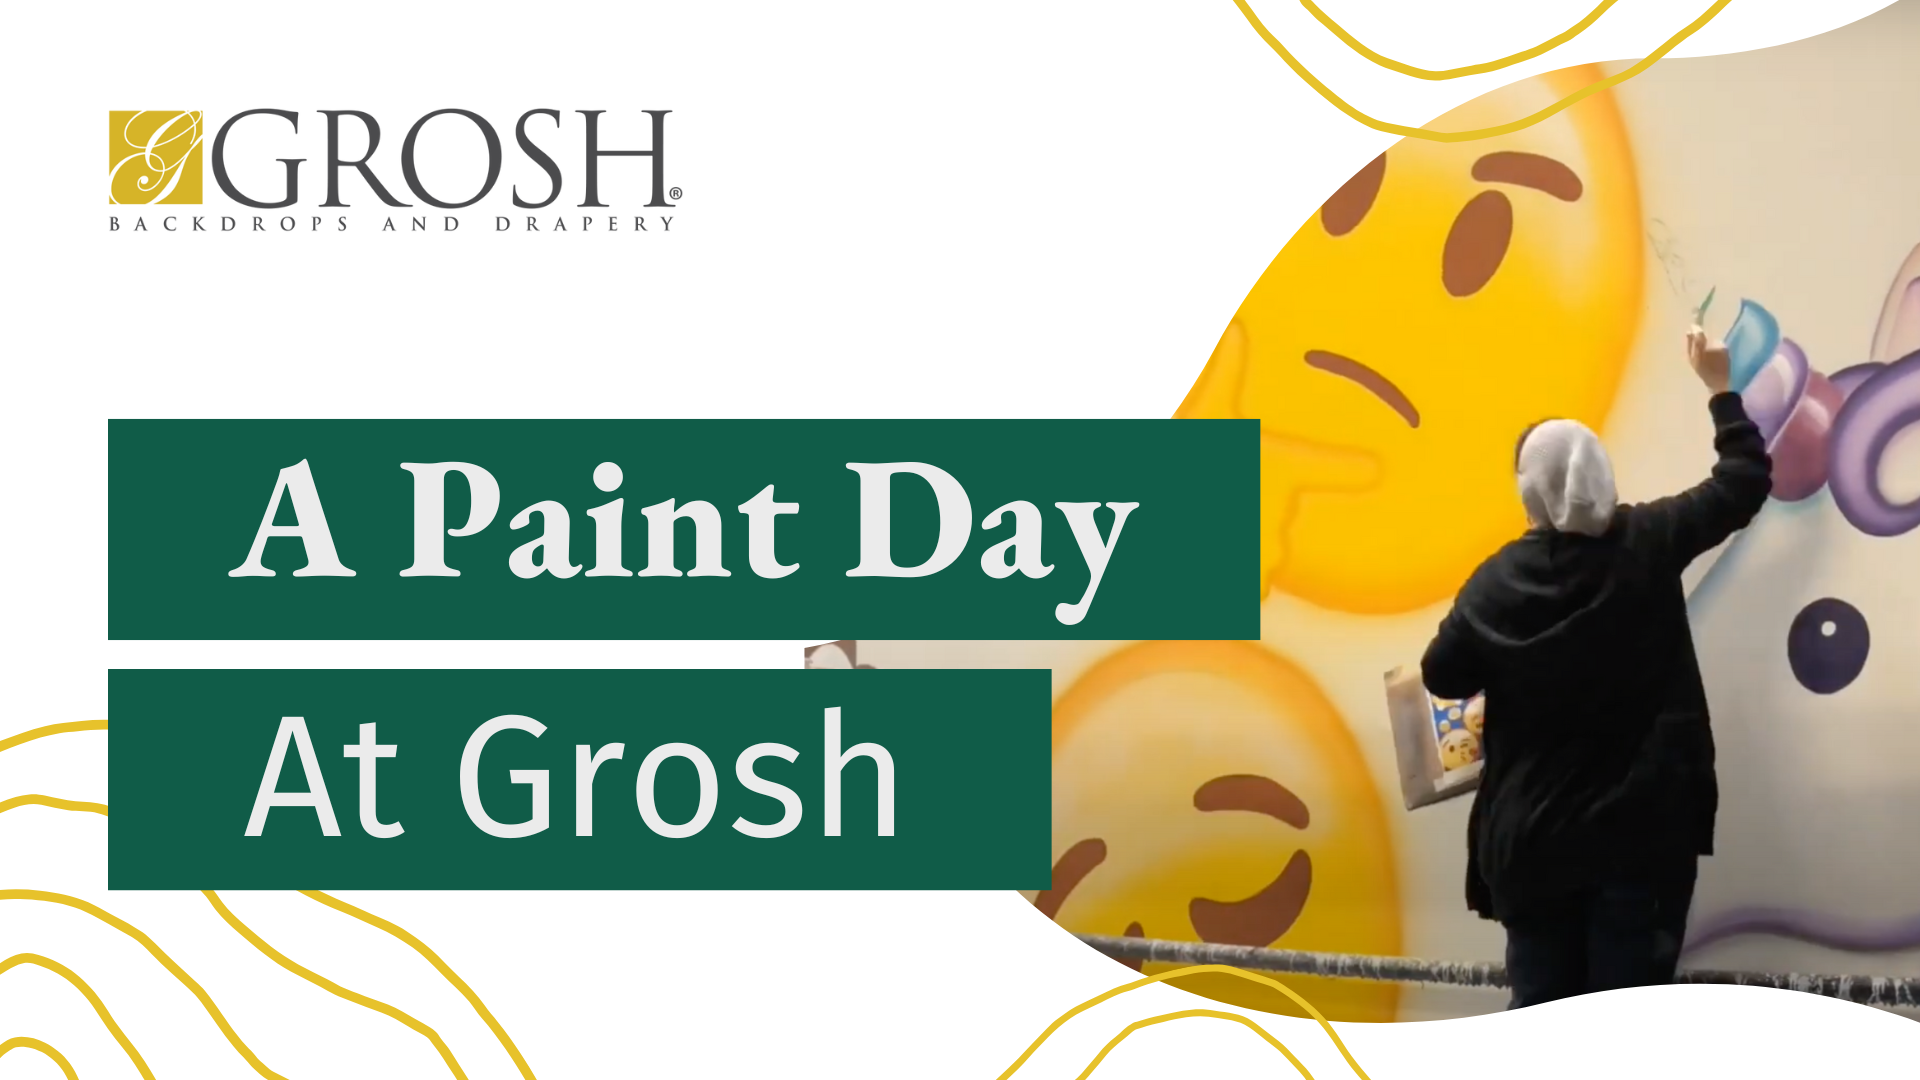 A Paint Day at Grosh